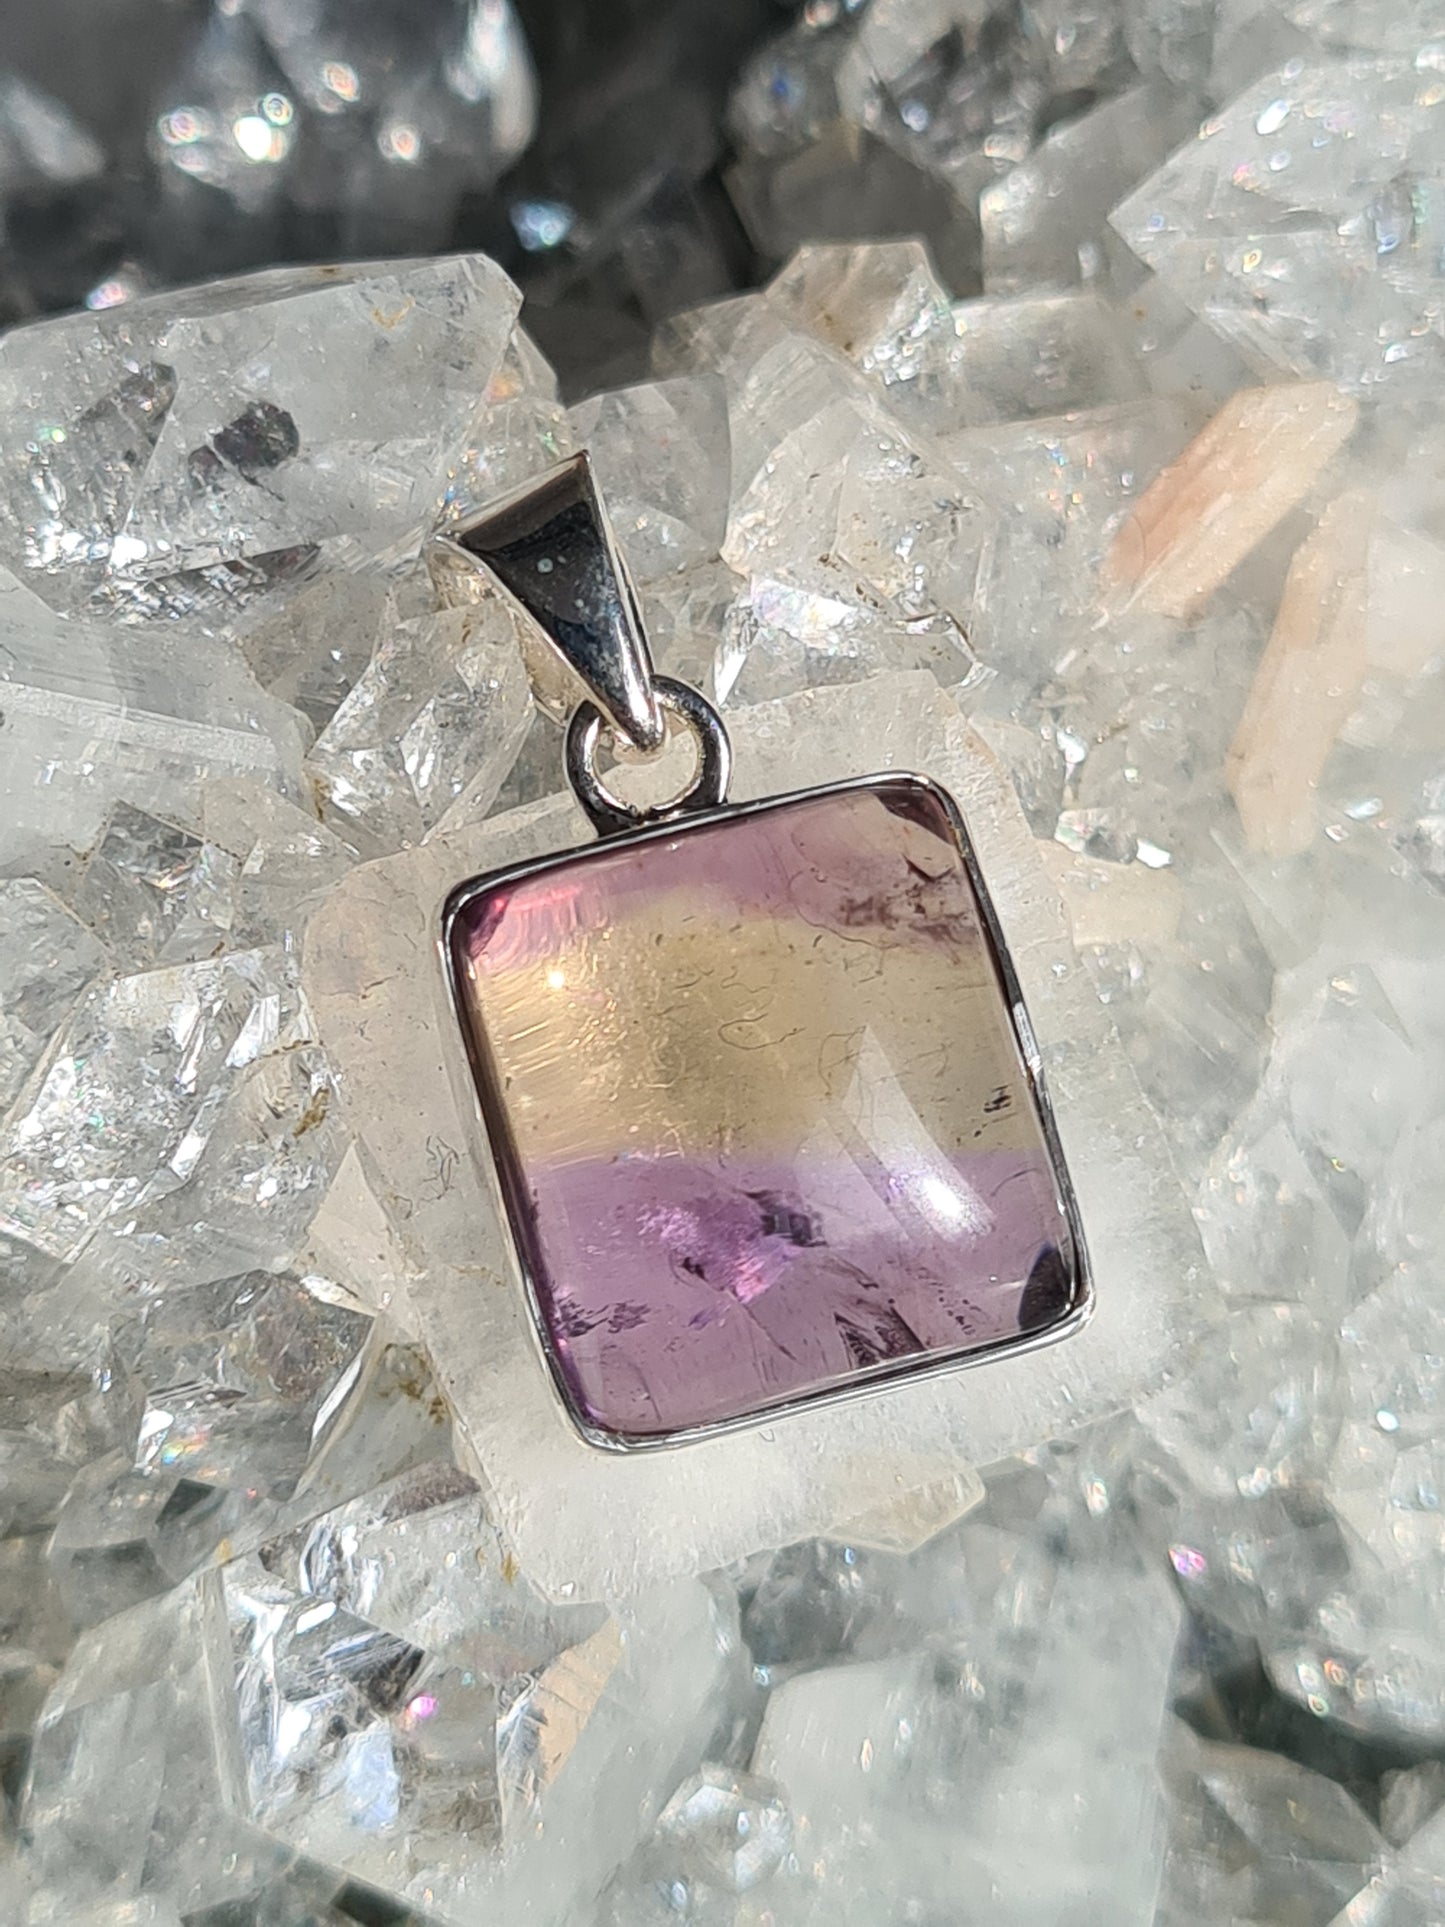 An Ametrine Pendant in Sterling Silver. The Ametrine is cushion shaped with clear zones of Amethyst and Citrine